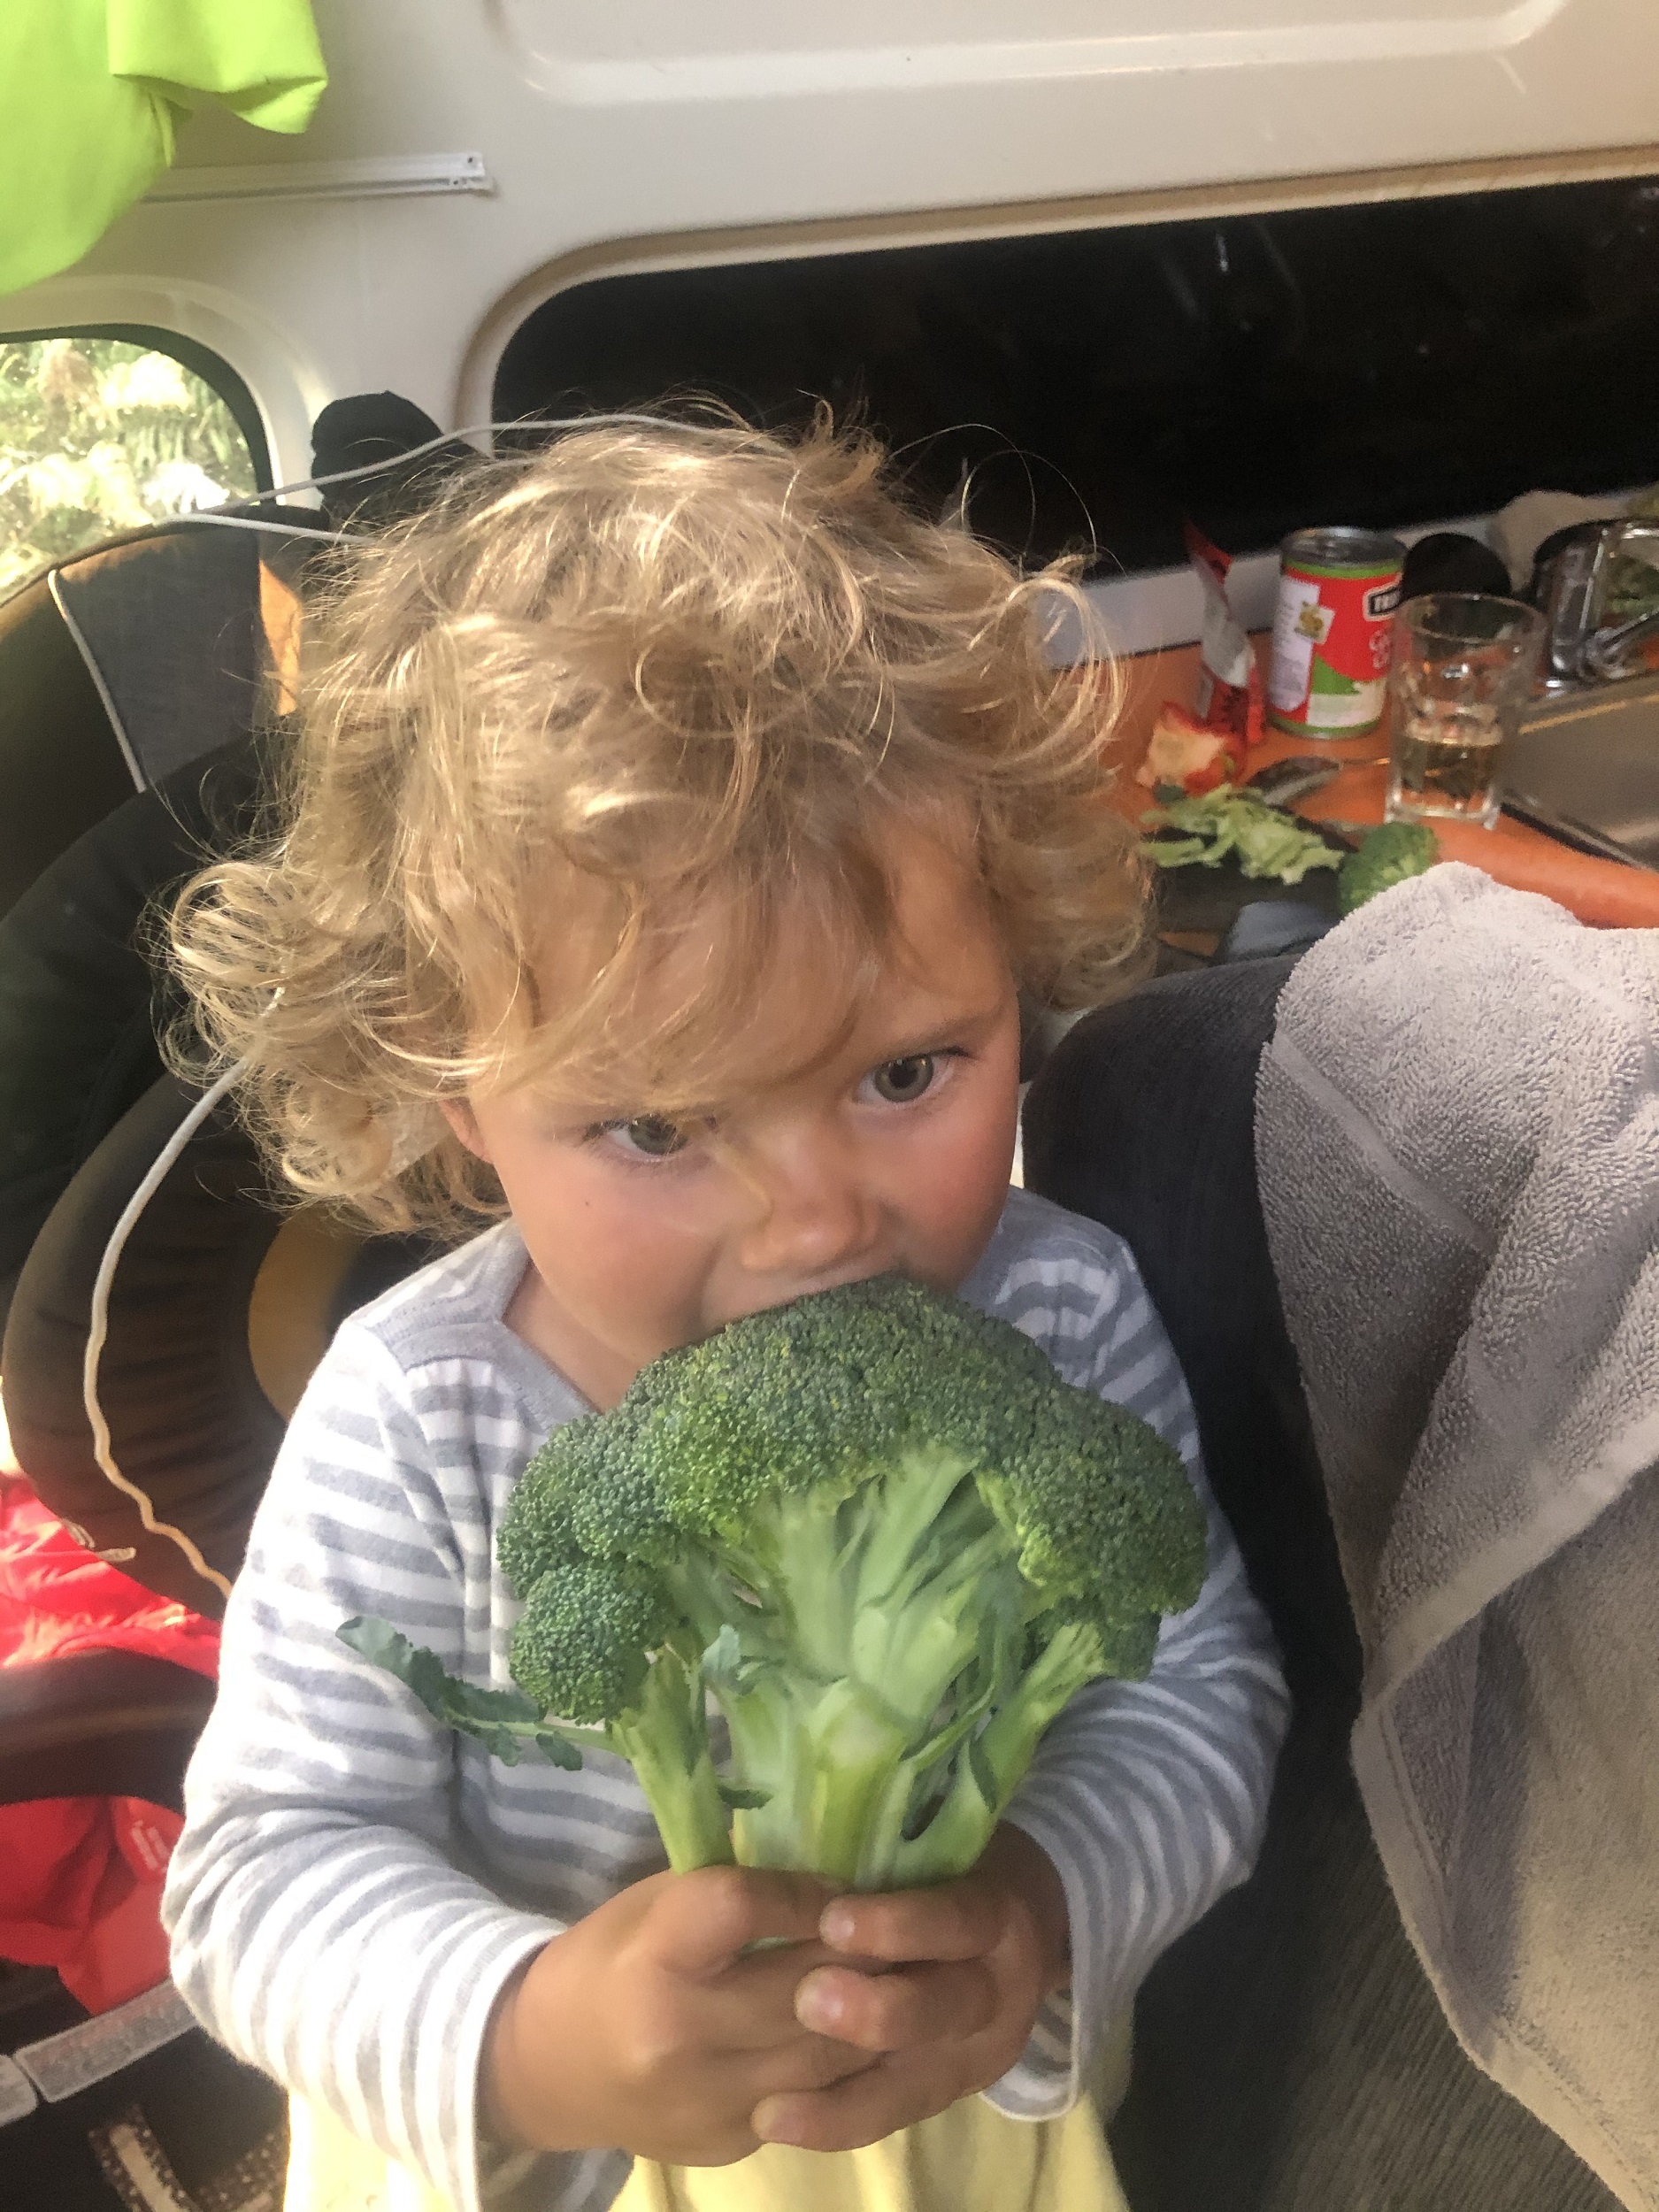 Vegan child eating a whole head of raw broccoli while traveling